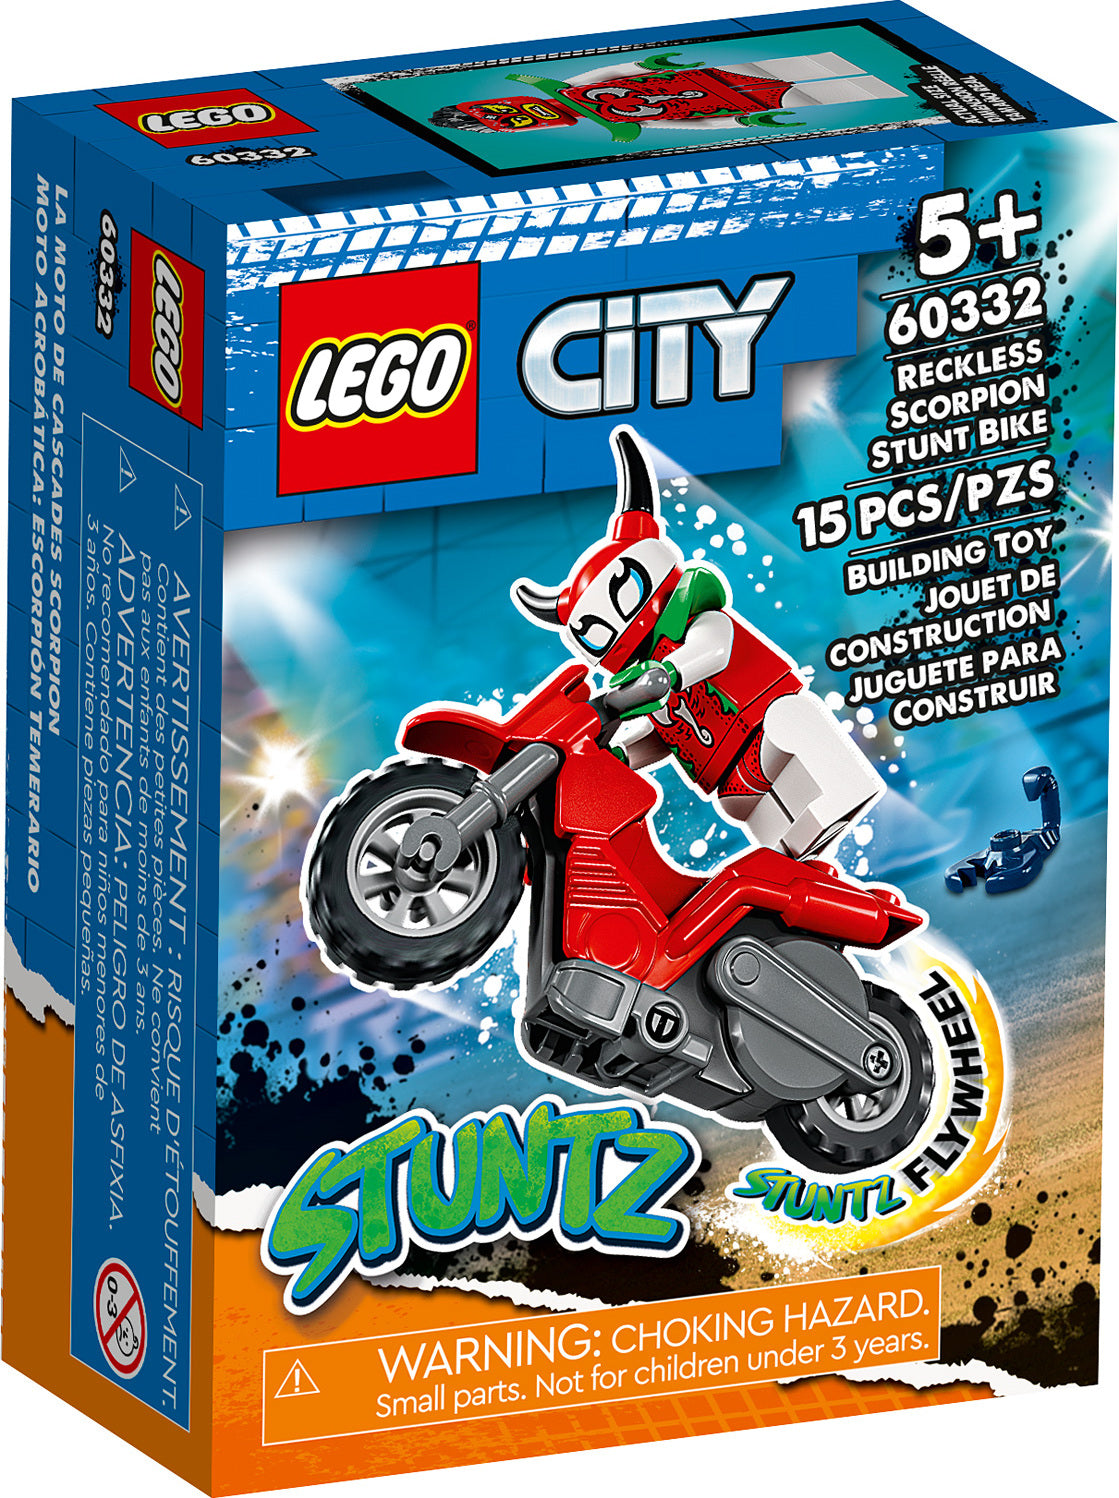 LEGO City Stuntz - Reckless Scorpion Stunt Bike - Best for Ages 6 to 9